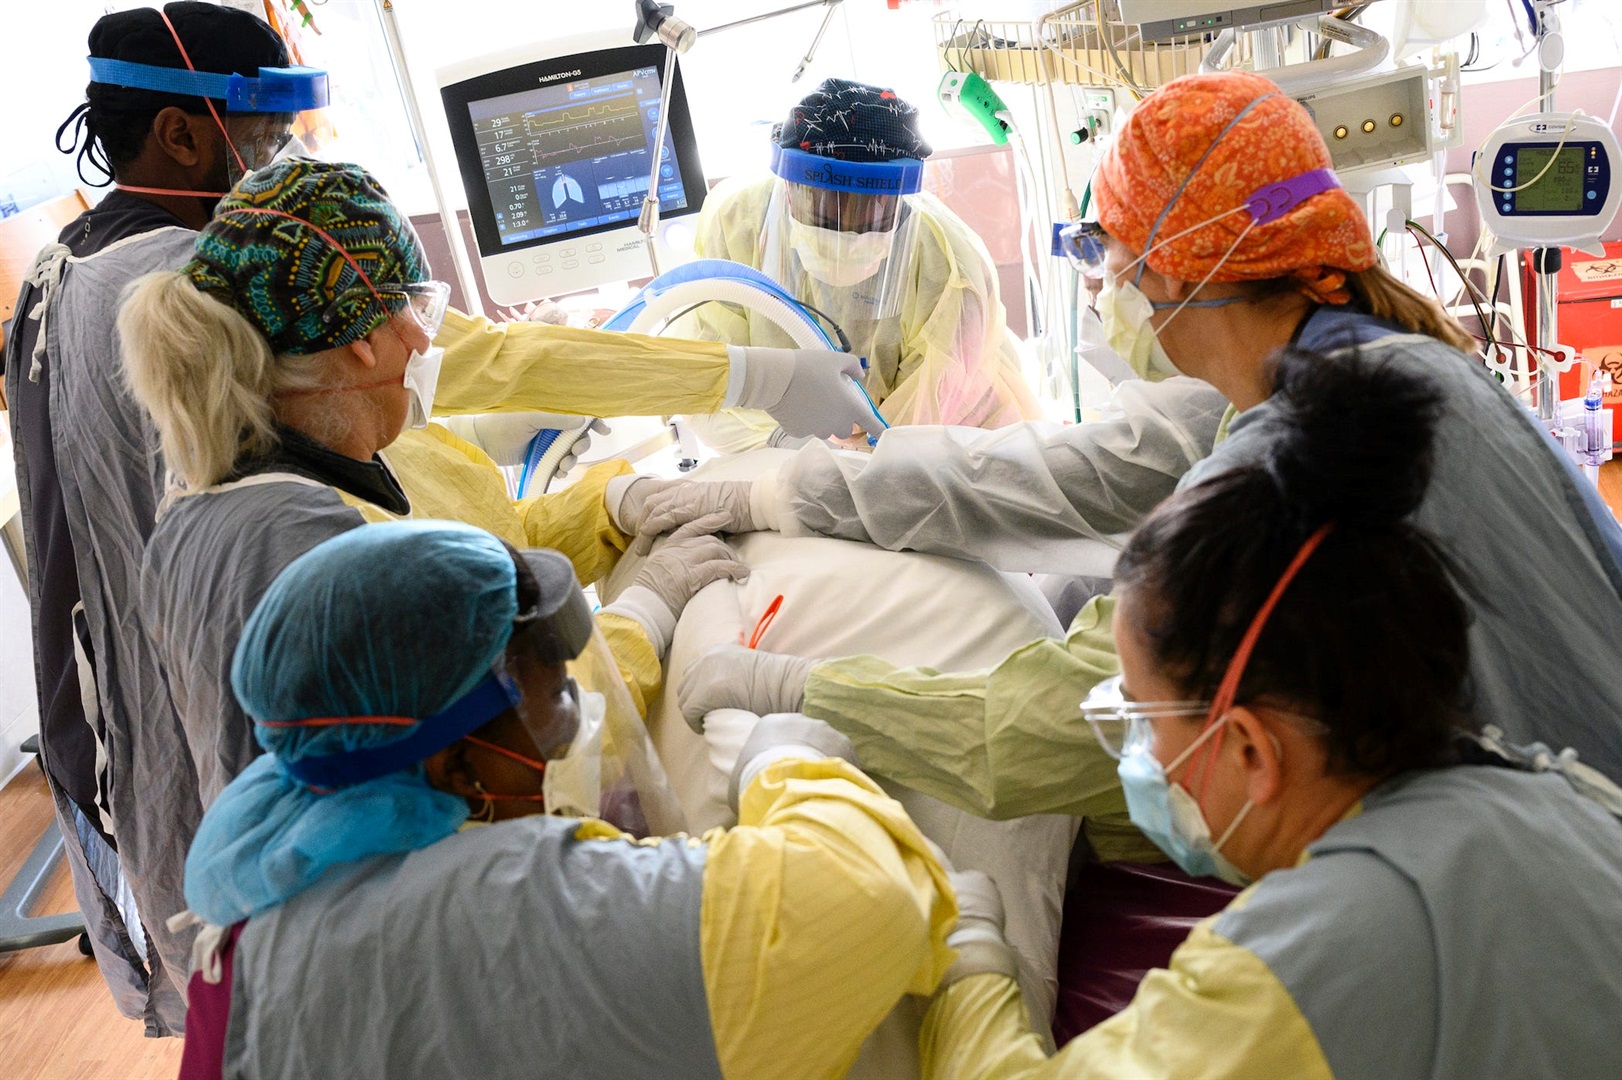 A team of critical care nurses and assistants treat a critically-ill COVID-19 patient on December 8, 2021, at North Memorial Health Hospital in Robbinsdale, Minnesota.